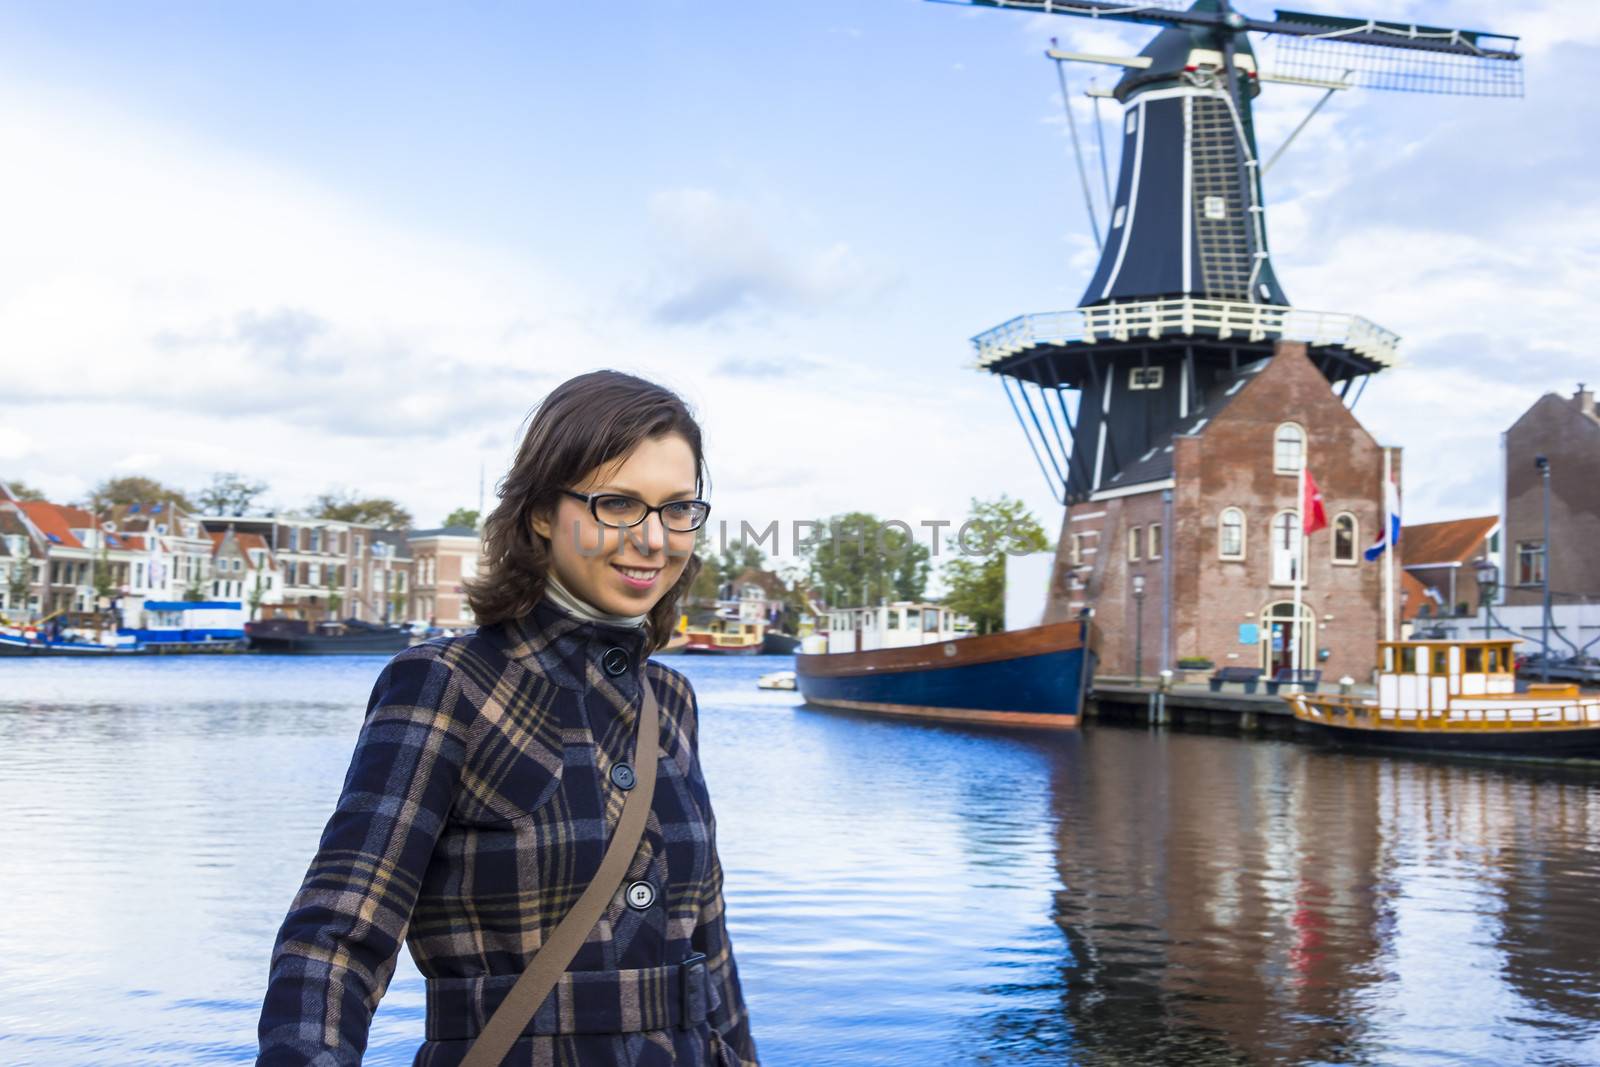 Girl on waterfront in Dutch town of Haarlem, the Netherlands